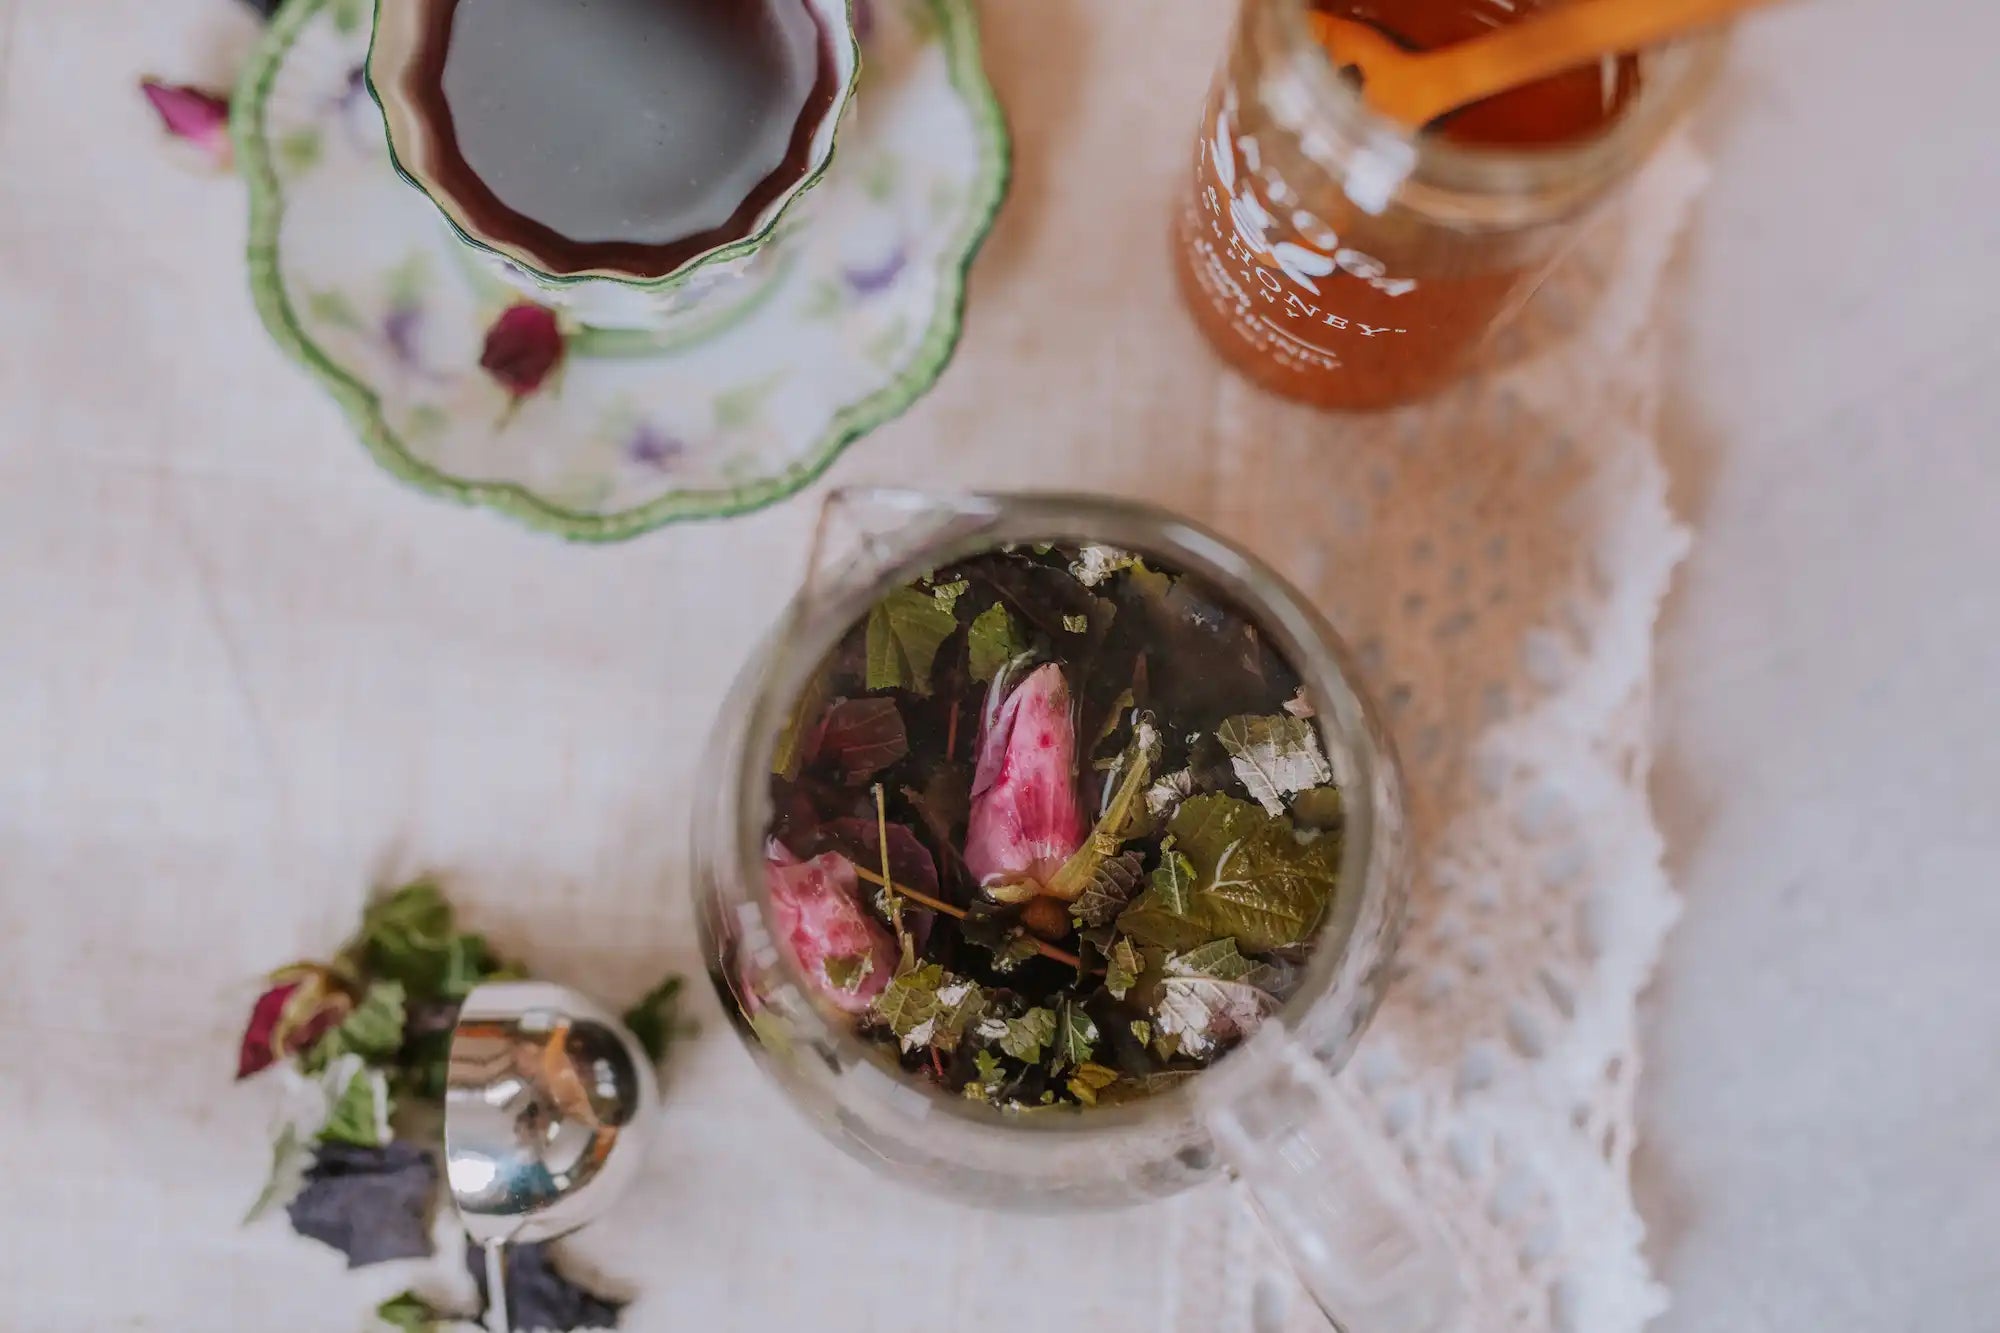 la vie en rose herbal tisane in a glass teapot with poured cup of purple herbal tea in a vintage cup